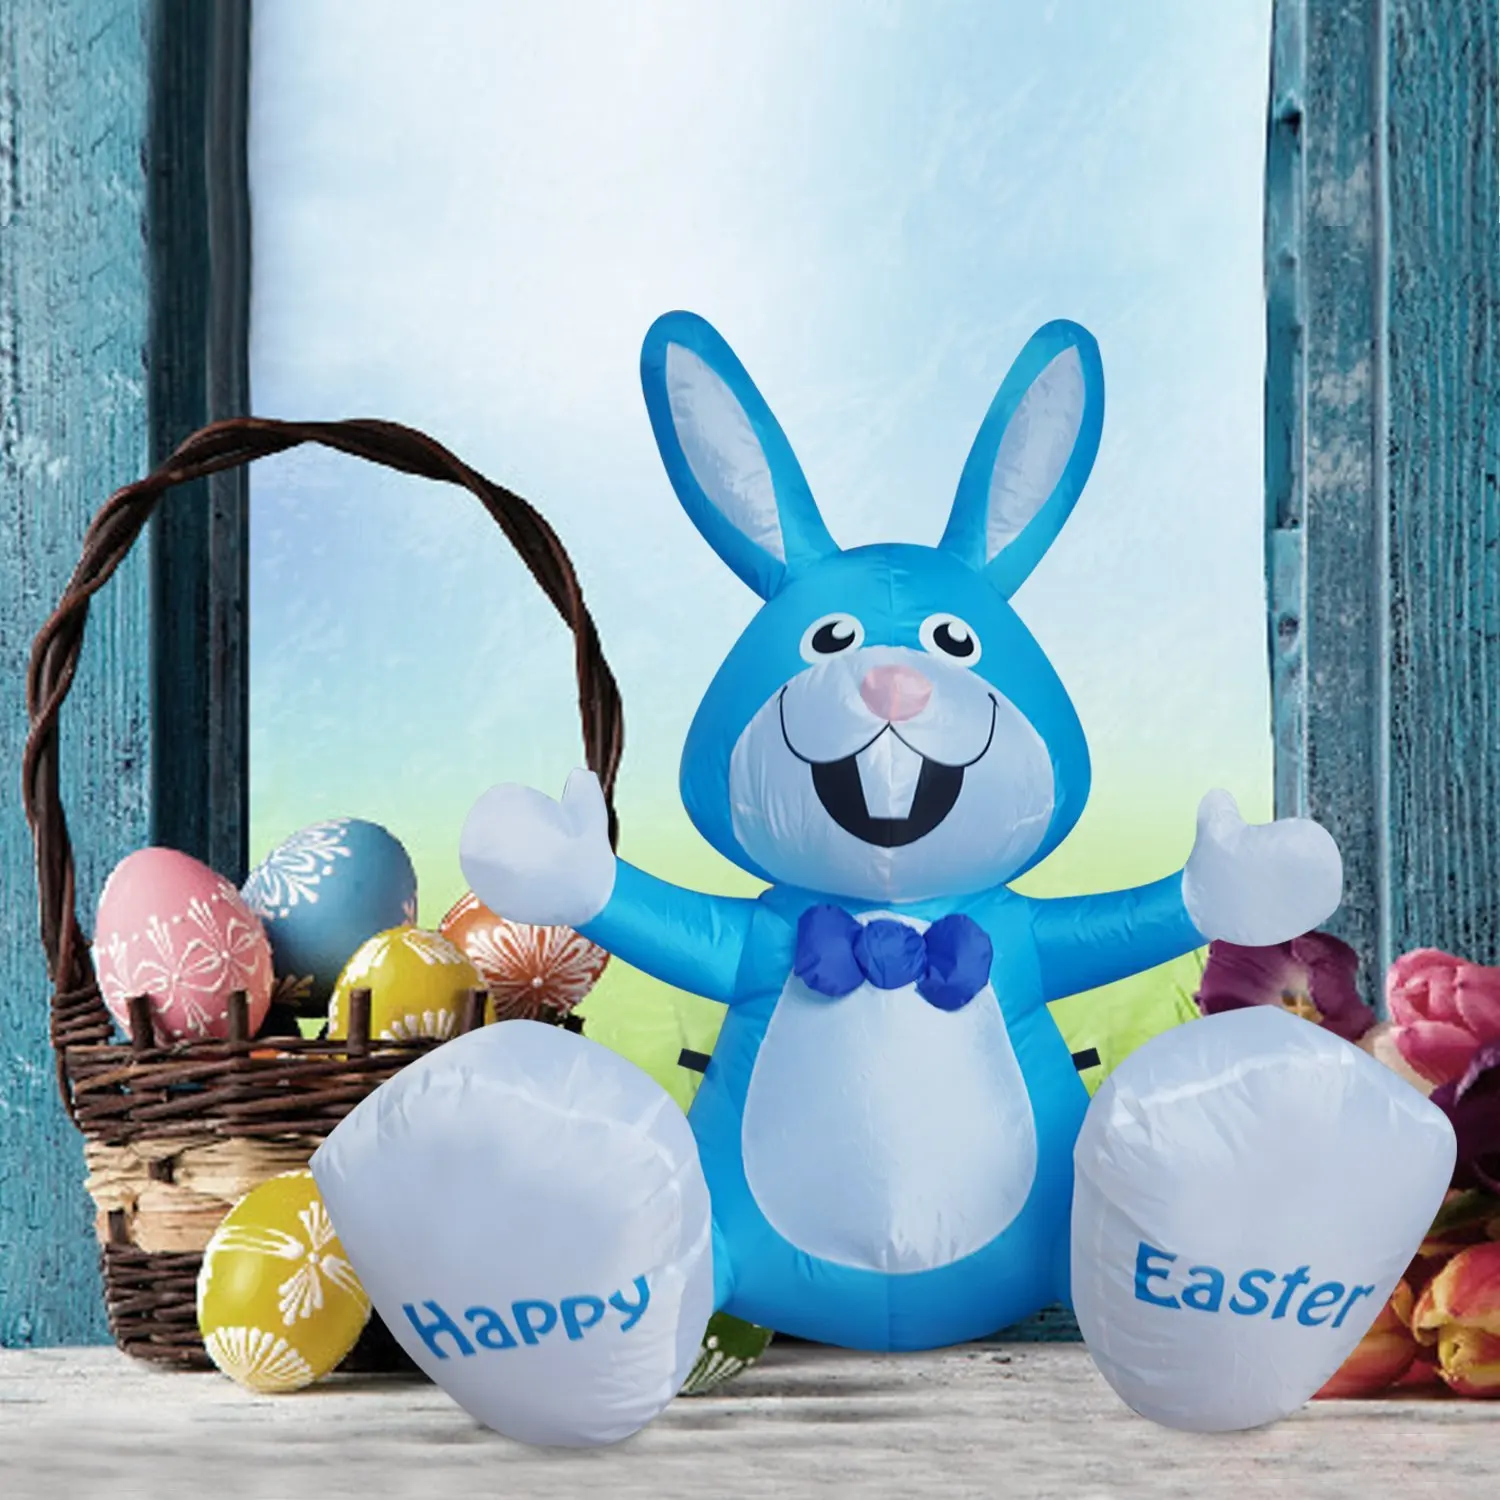 SEASONBLOW 8 FT LED Light Happy Easter Inflatable Bunny with Basket and Col...